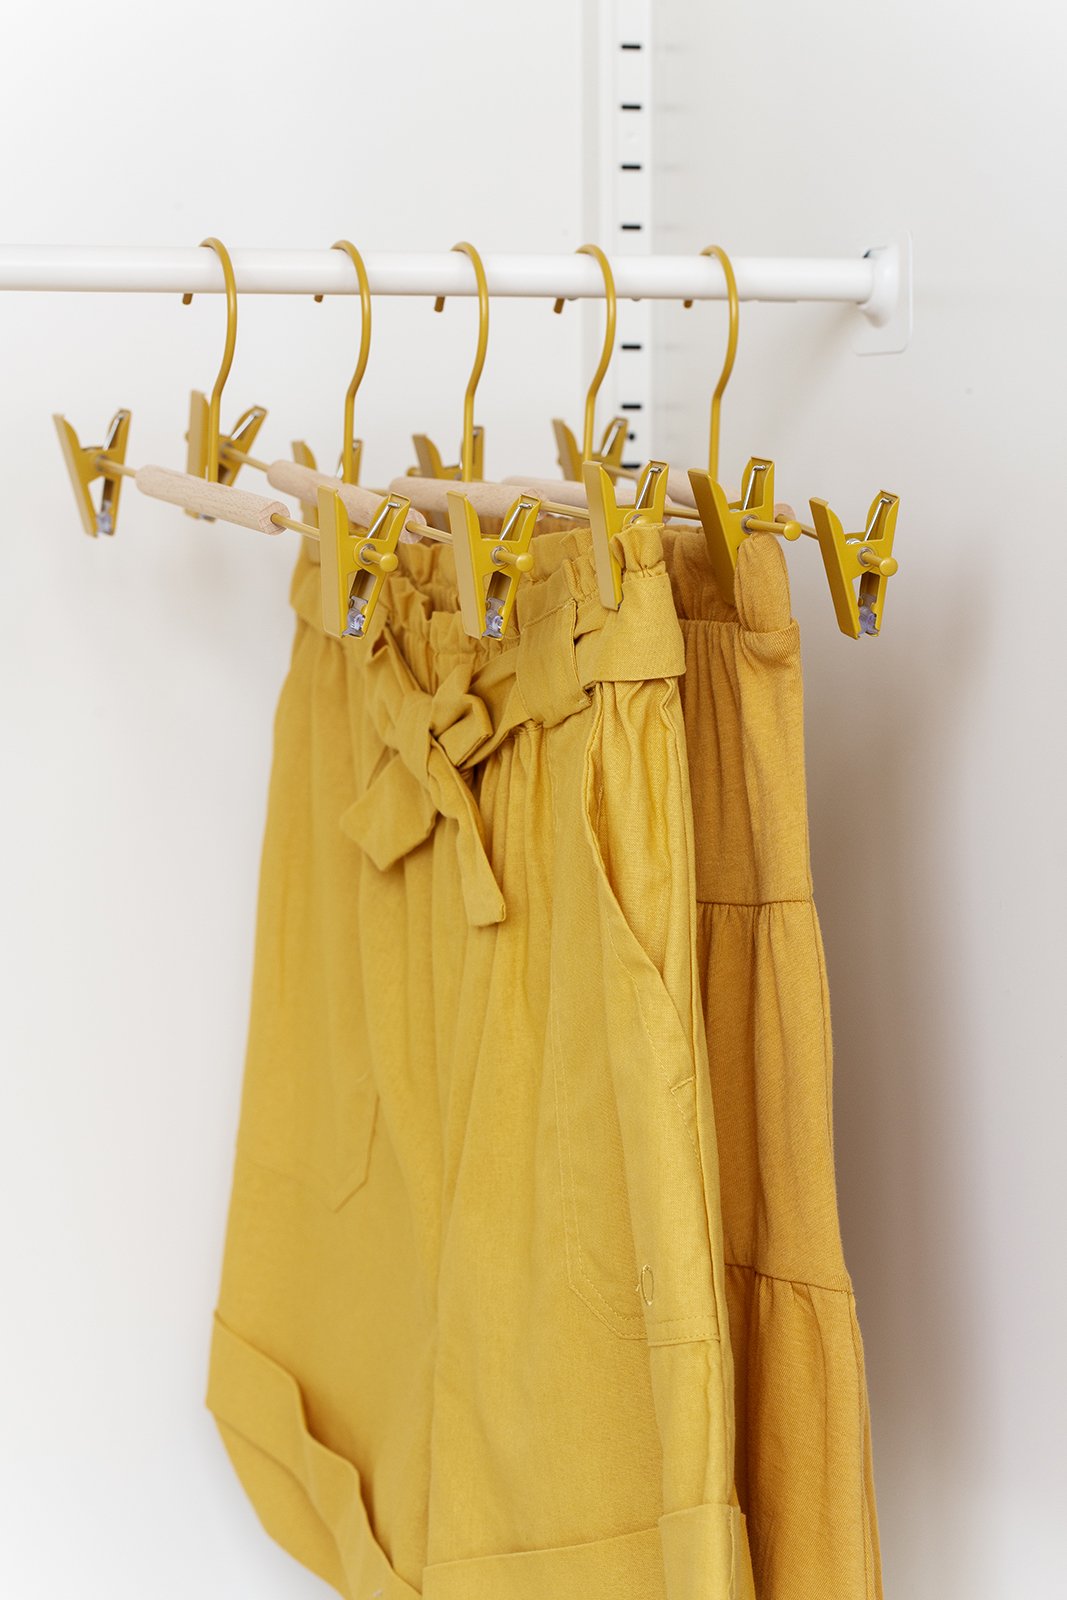 Mustard Made's Adult Clip Hangers in Mustard Pack of 5